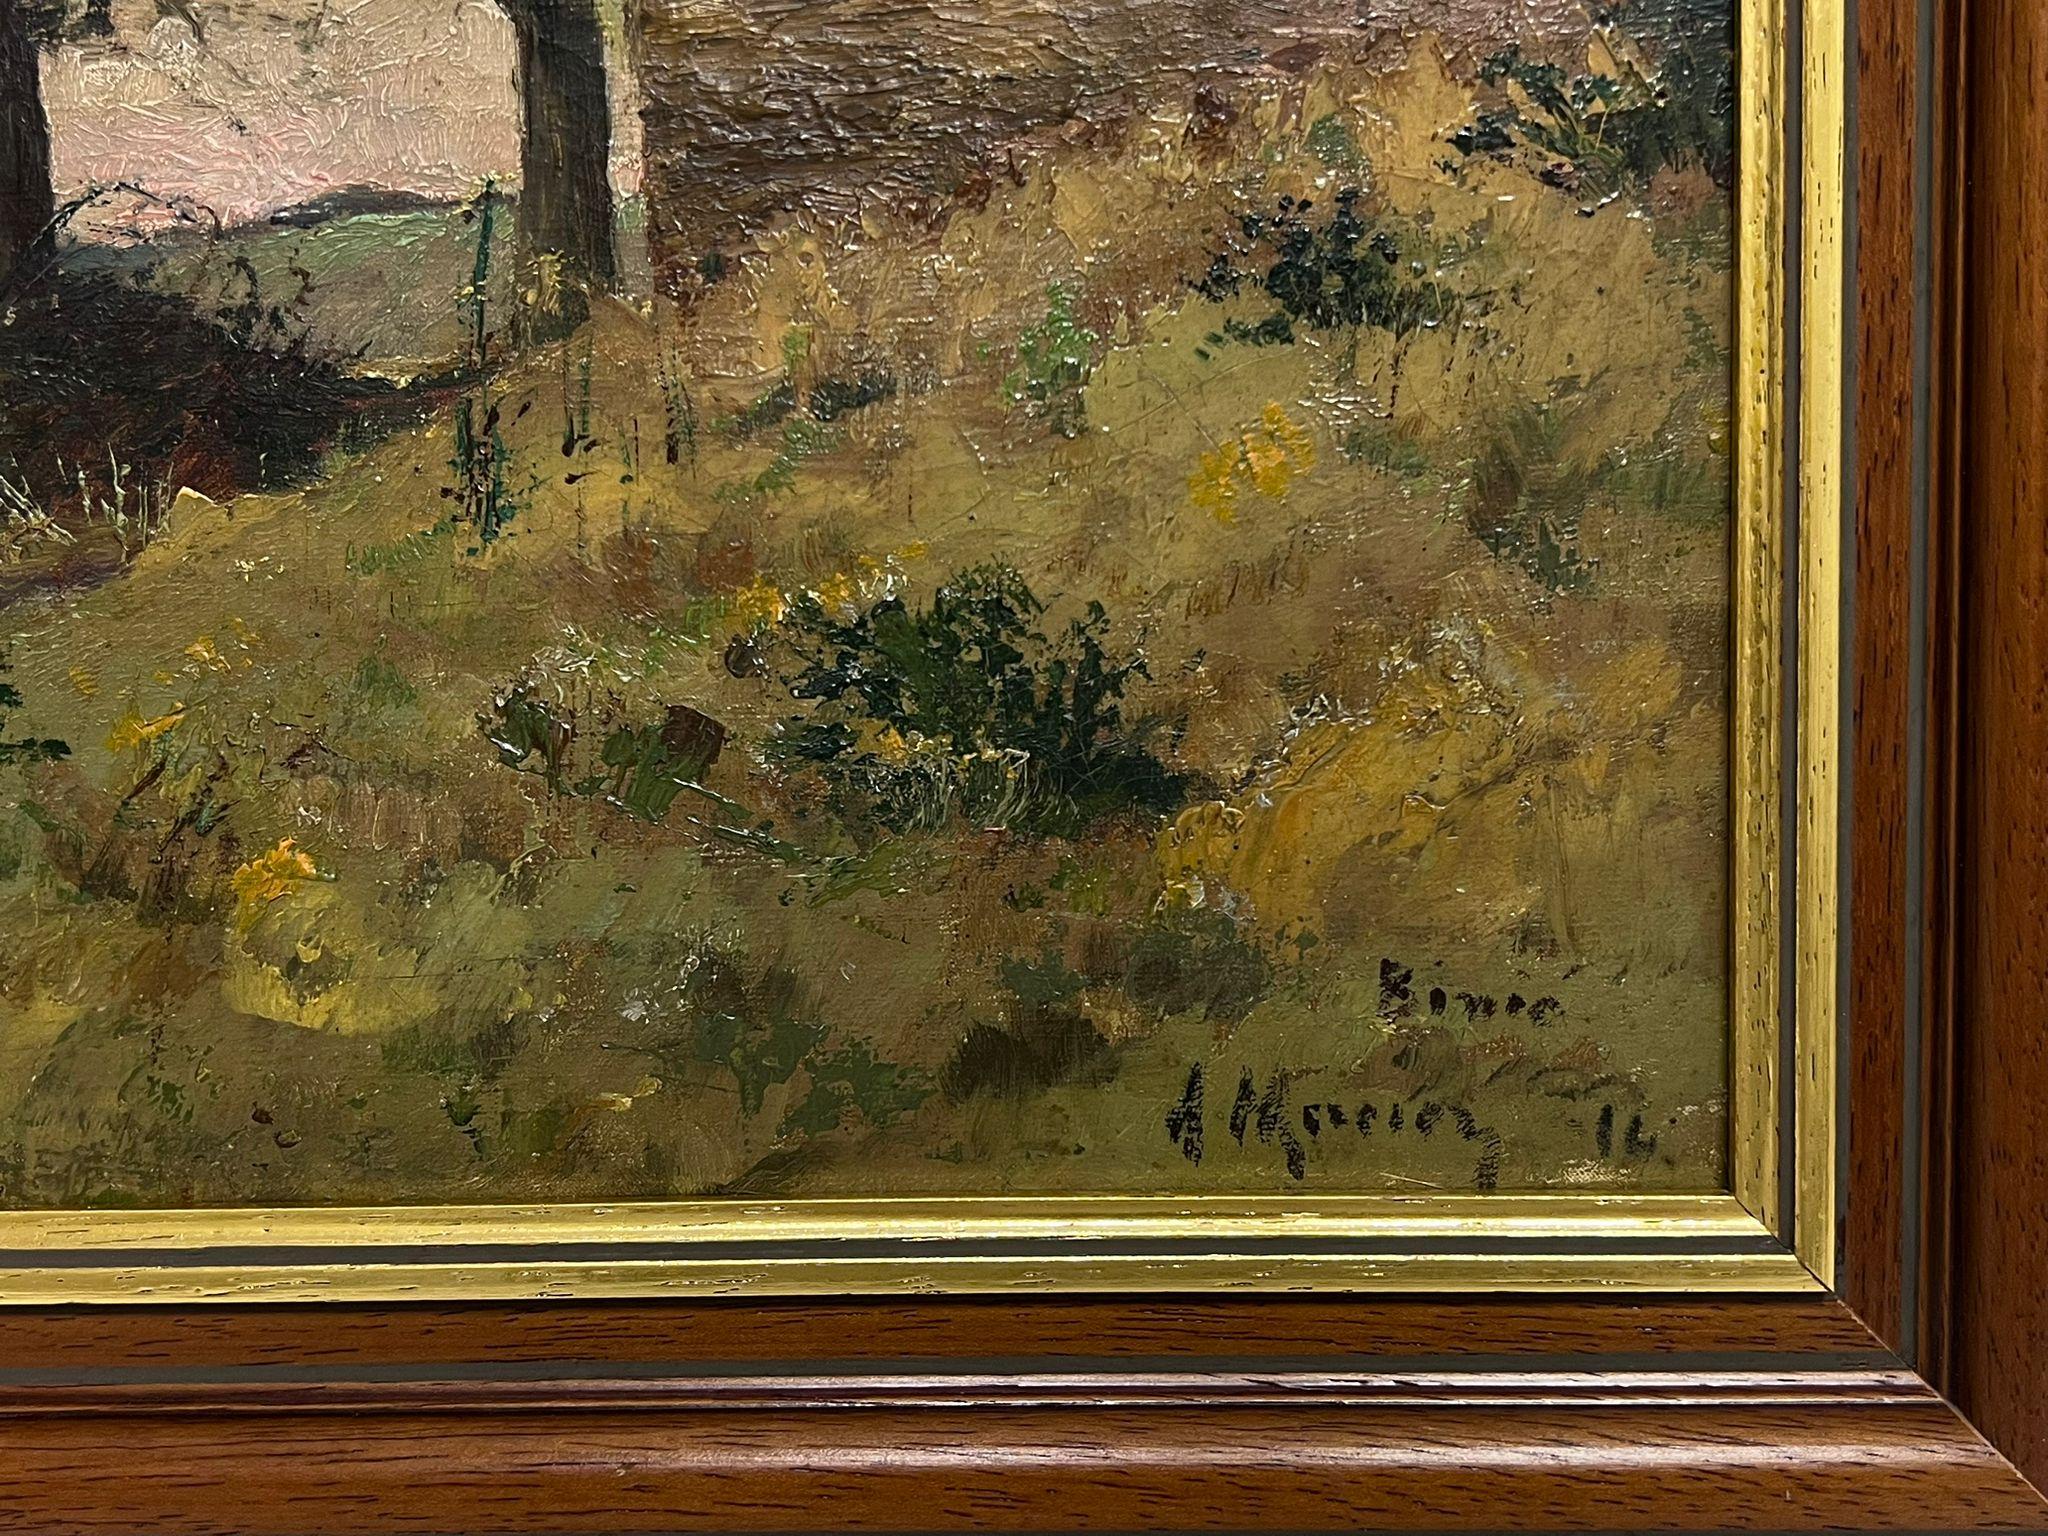 French Impressionist artist 1914
signed oil on canvas, framed
framed: 14 x 19 inches
canvas: 11 x 16 inches
provenance: private collection, France
condition: very good and sound condition